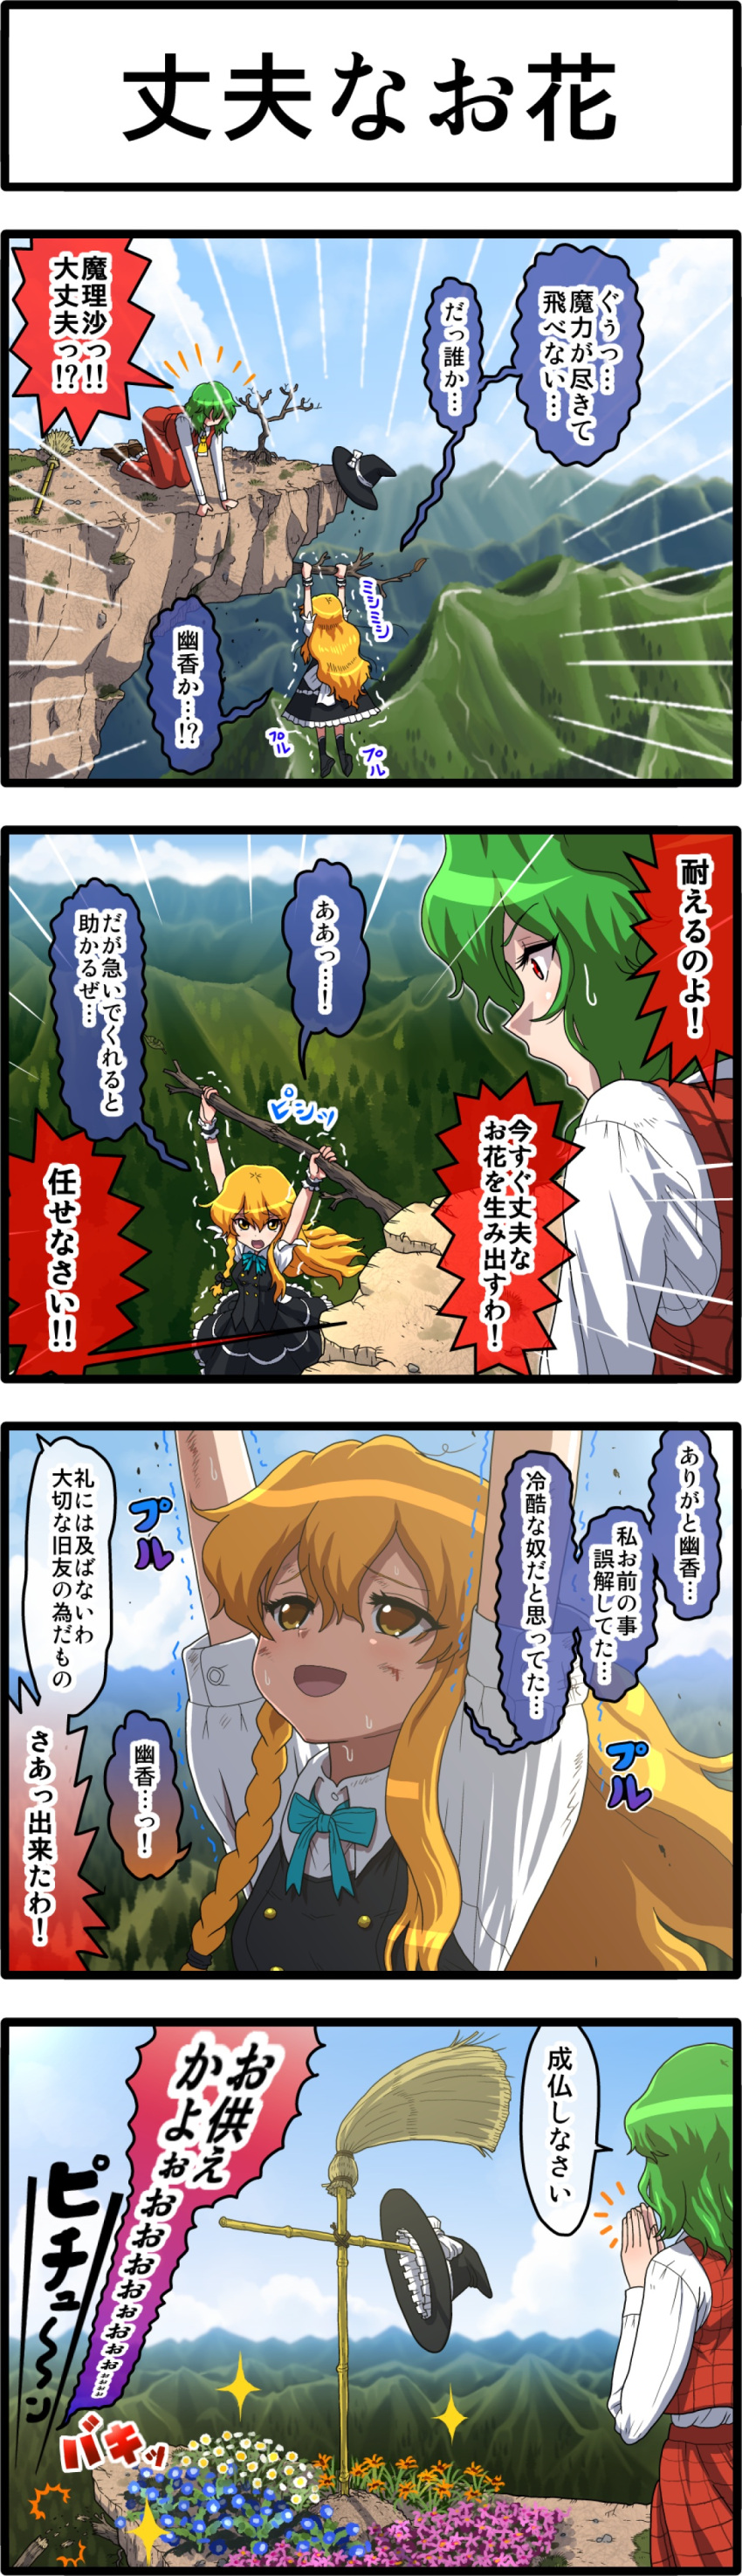 2girls 4koma absurdres apron bamboo bamboo_broom black_dress blonde_hair blood bow bowtie braid branch broom cliff comic cross dress fallen_down flower green_hair hands_clasped hanging_on hat hat_bow hat_removed headwear_removed highres injury kazami_yuuka kezune_(i-_-i) kirisame_marisa long_hair mountain multiple_girls necktie partially_translated plaid plaid_skirt plaid_vest praying red_eyes short_hair side_braid skirt sparkle sweat touhou translation_request trembling witch_hat wrist_cuffs yellow_eyes